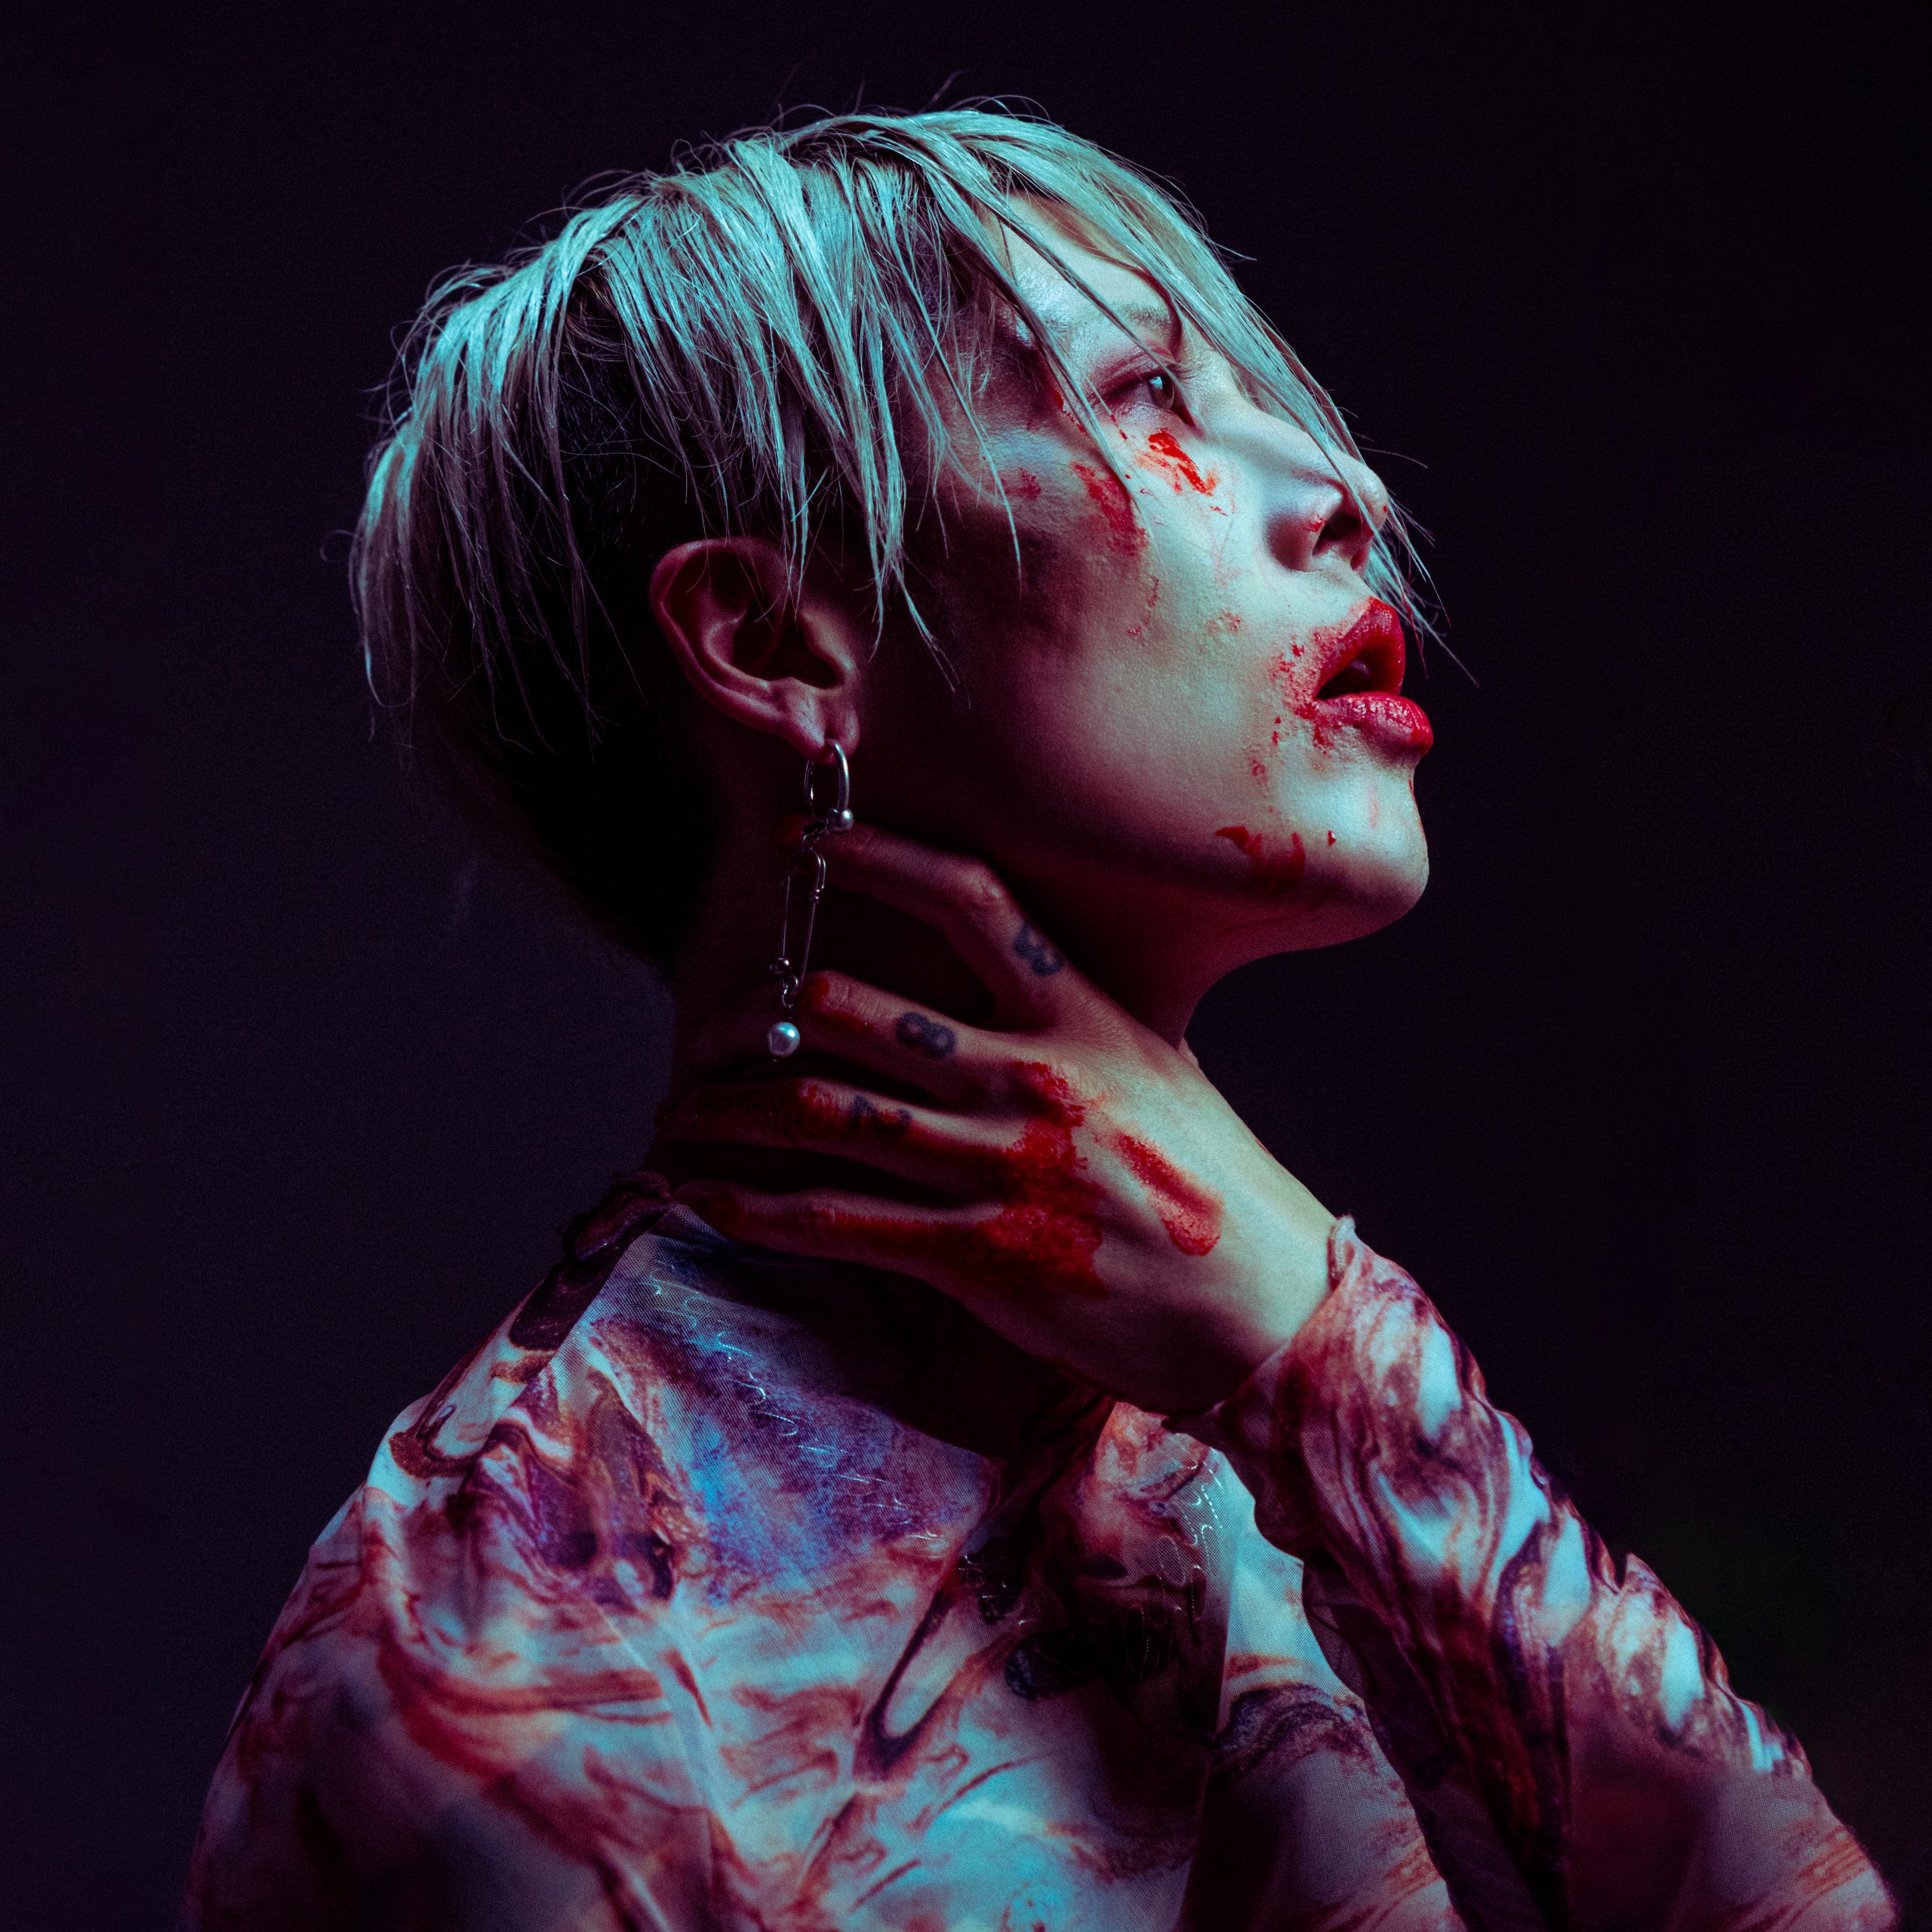 MIYAVI-Broken-Fantasy／Tragedy-Of-Us-Jacket-scaled MIYAVI’s Long-Awaited First New Album in Three Years to Release in Two Parts. Part 1 Arrives on April 3!